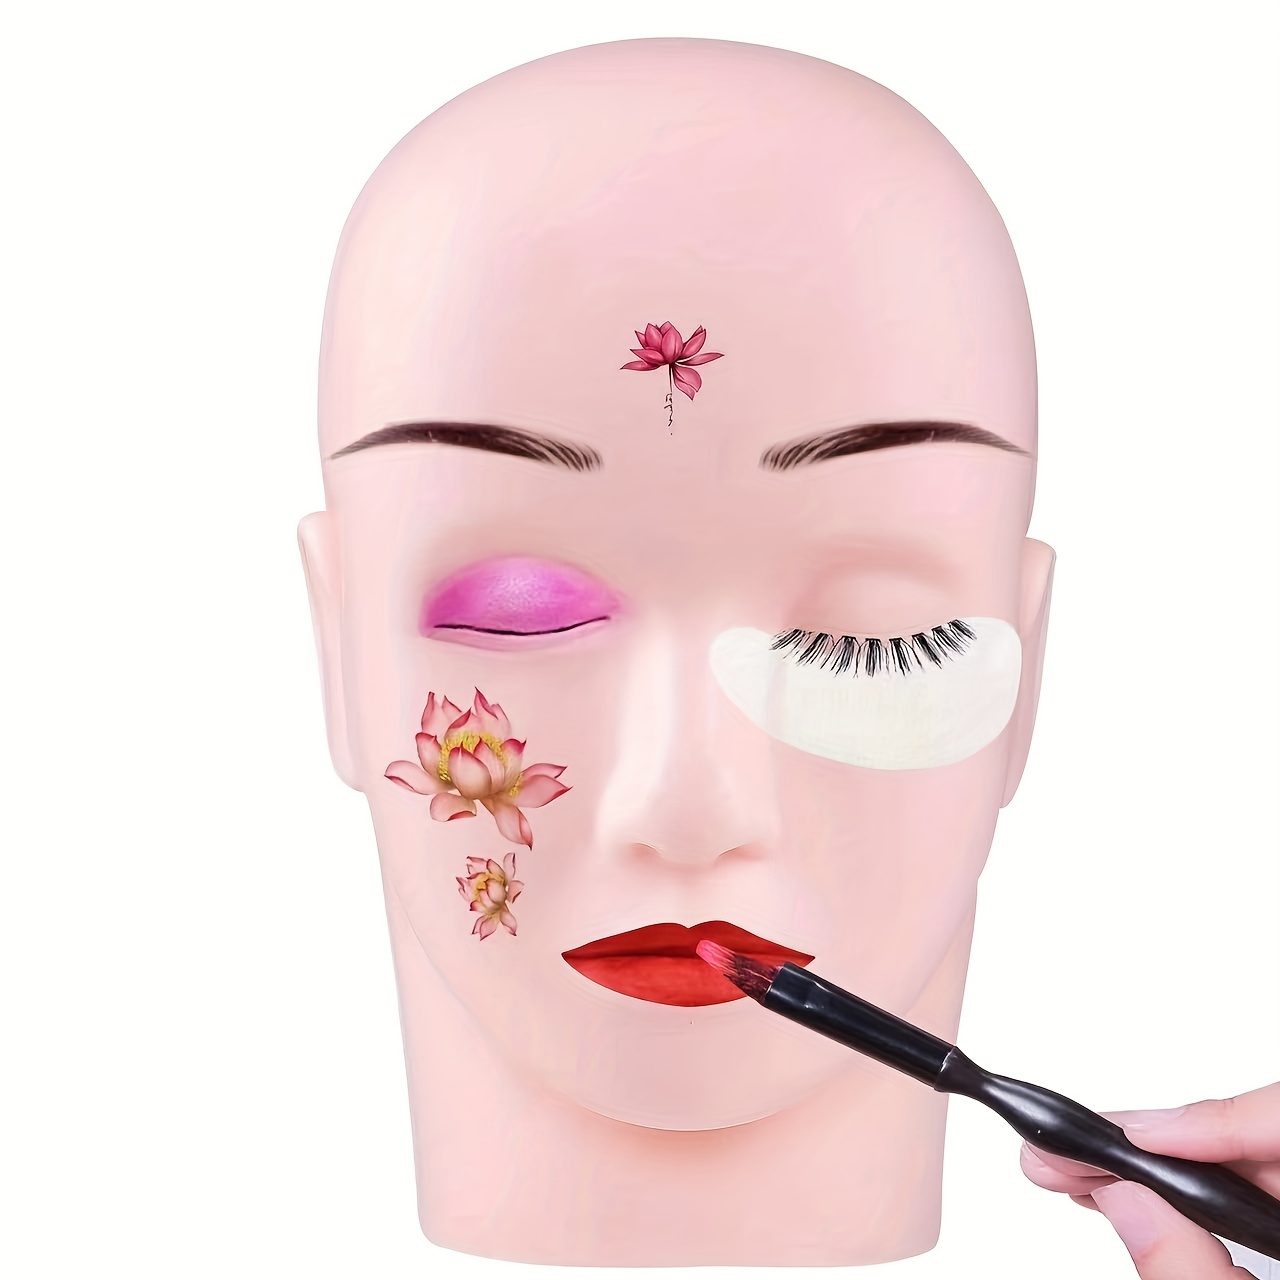 Soft Silicone Cosmetology Mannequin Head For Makeup/Grafting Eyebrow  Design/ Massage / Practice Face Painting Doll Model